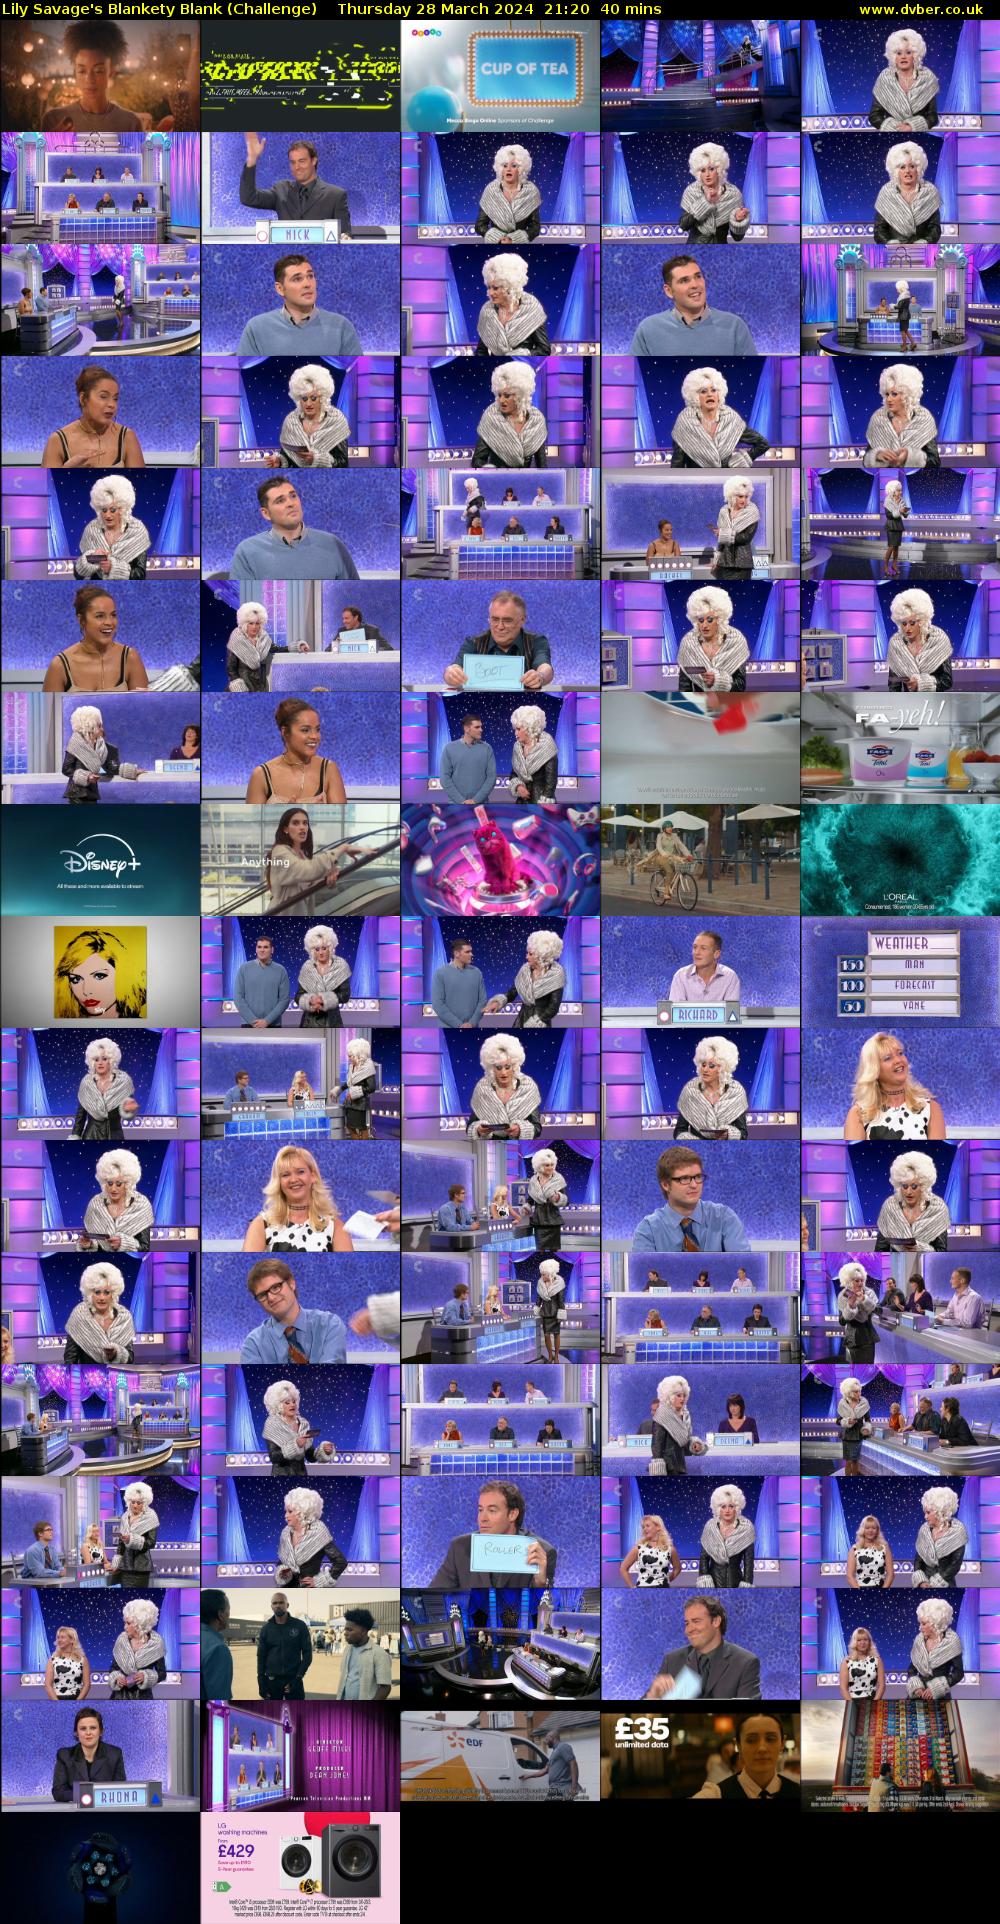 Lily Savage's Blankety Blank (Challenge) Thursday 28 March 2024 21:20 - 22:00